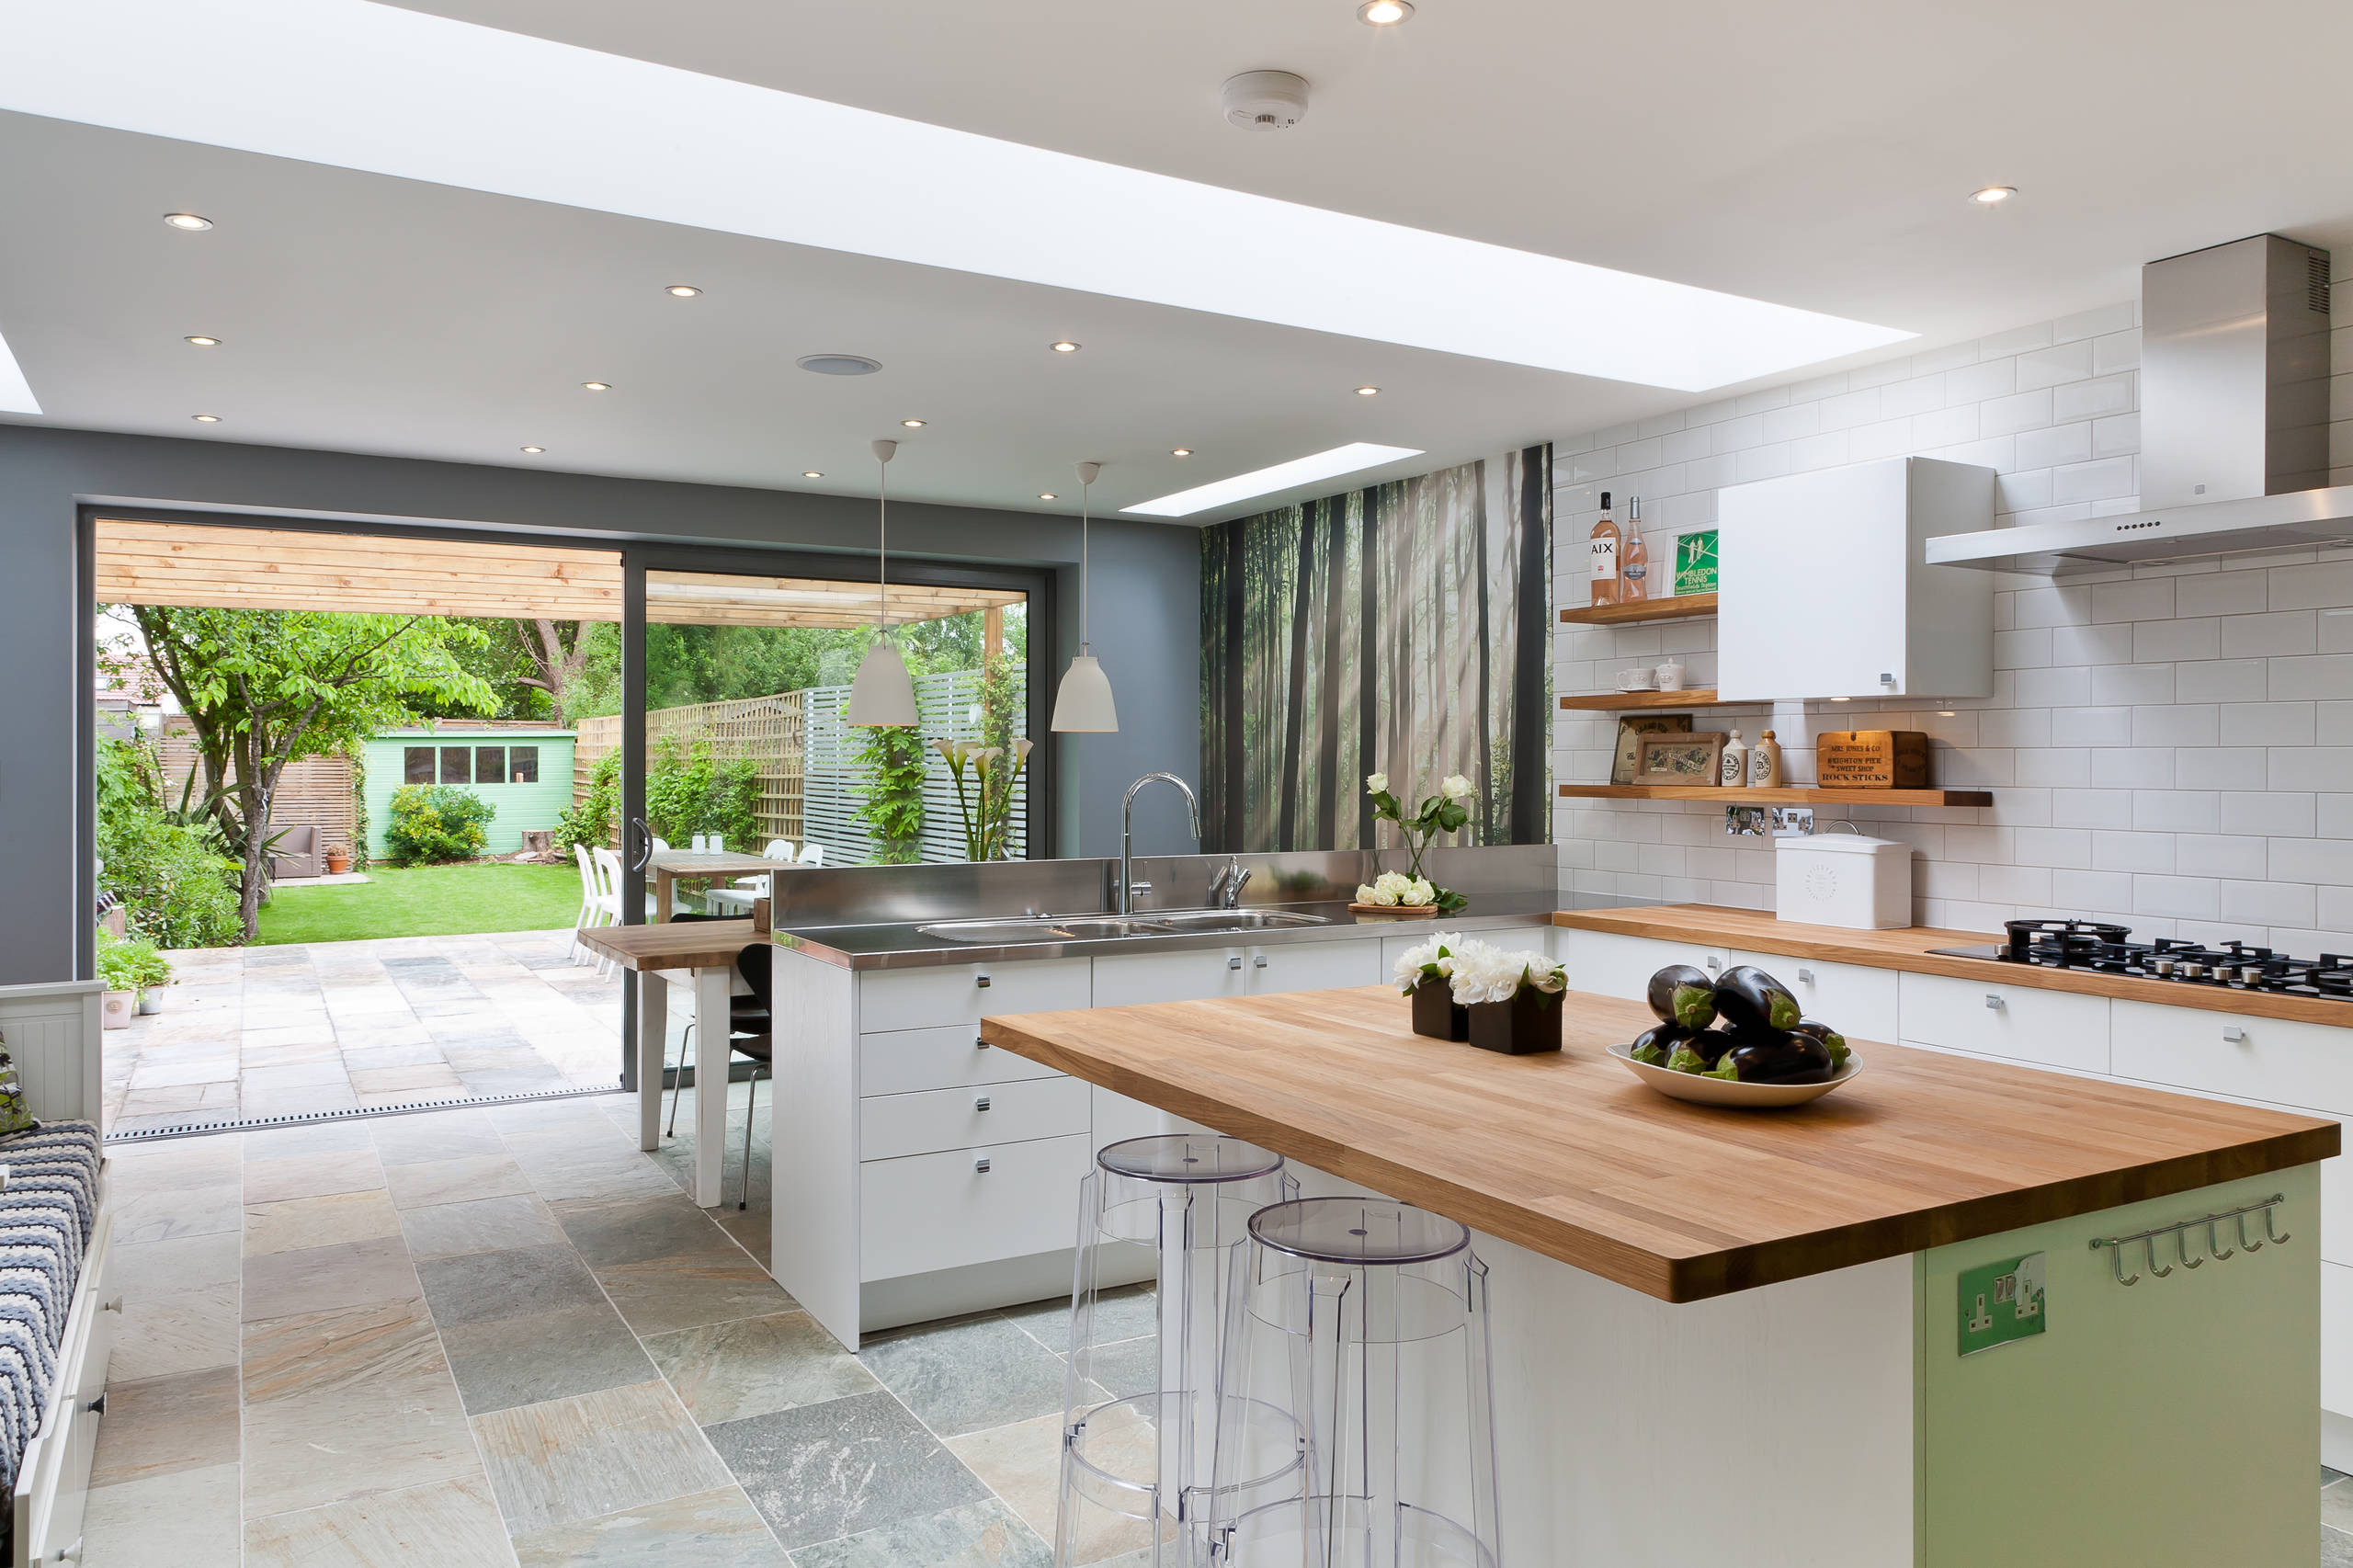 https://st.hzcdn.com/simgs/pictures/kitchens/evelyn-road-wimbledon-50-degrees-north-architects-img~070174a20413089c_14-5533-1-80ec559.jpg